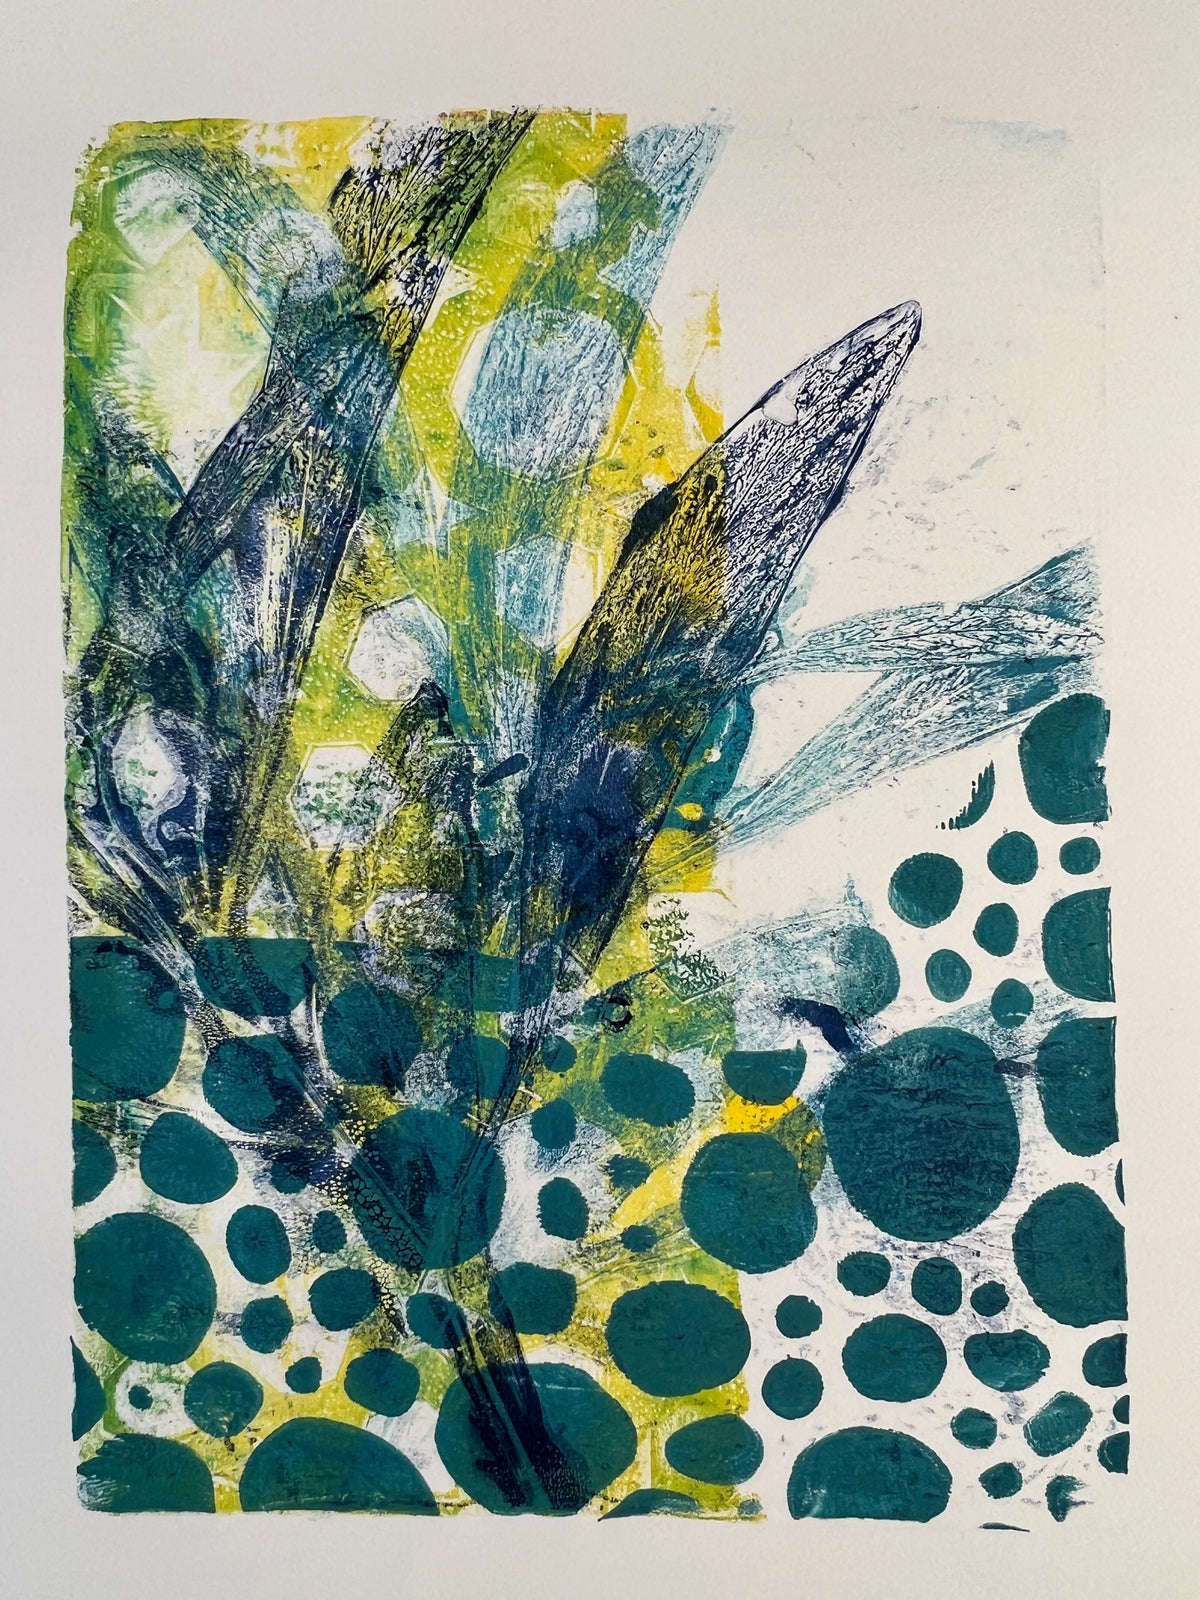 Gelli Print Play - 9 March Monoprinting with Gel Plates (Workshop in West Ryde)